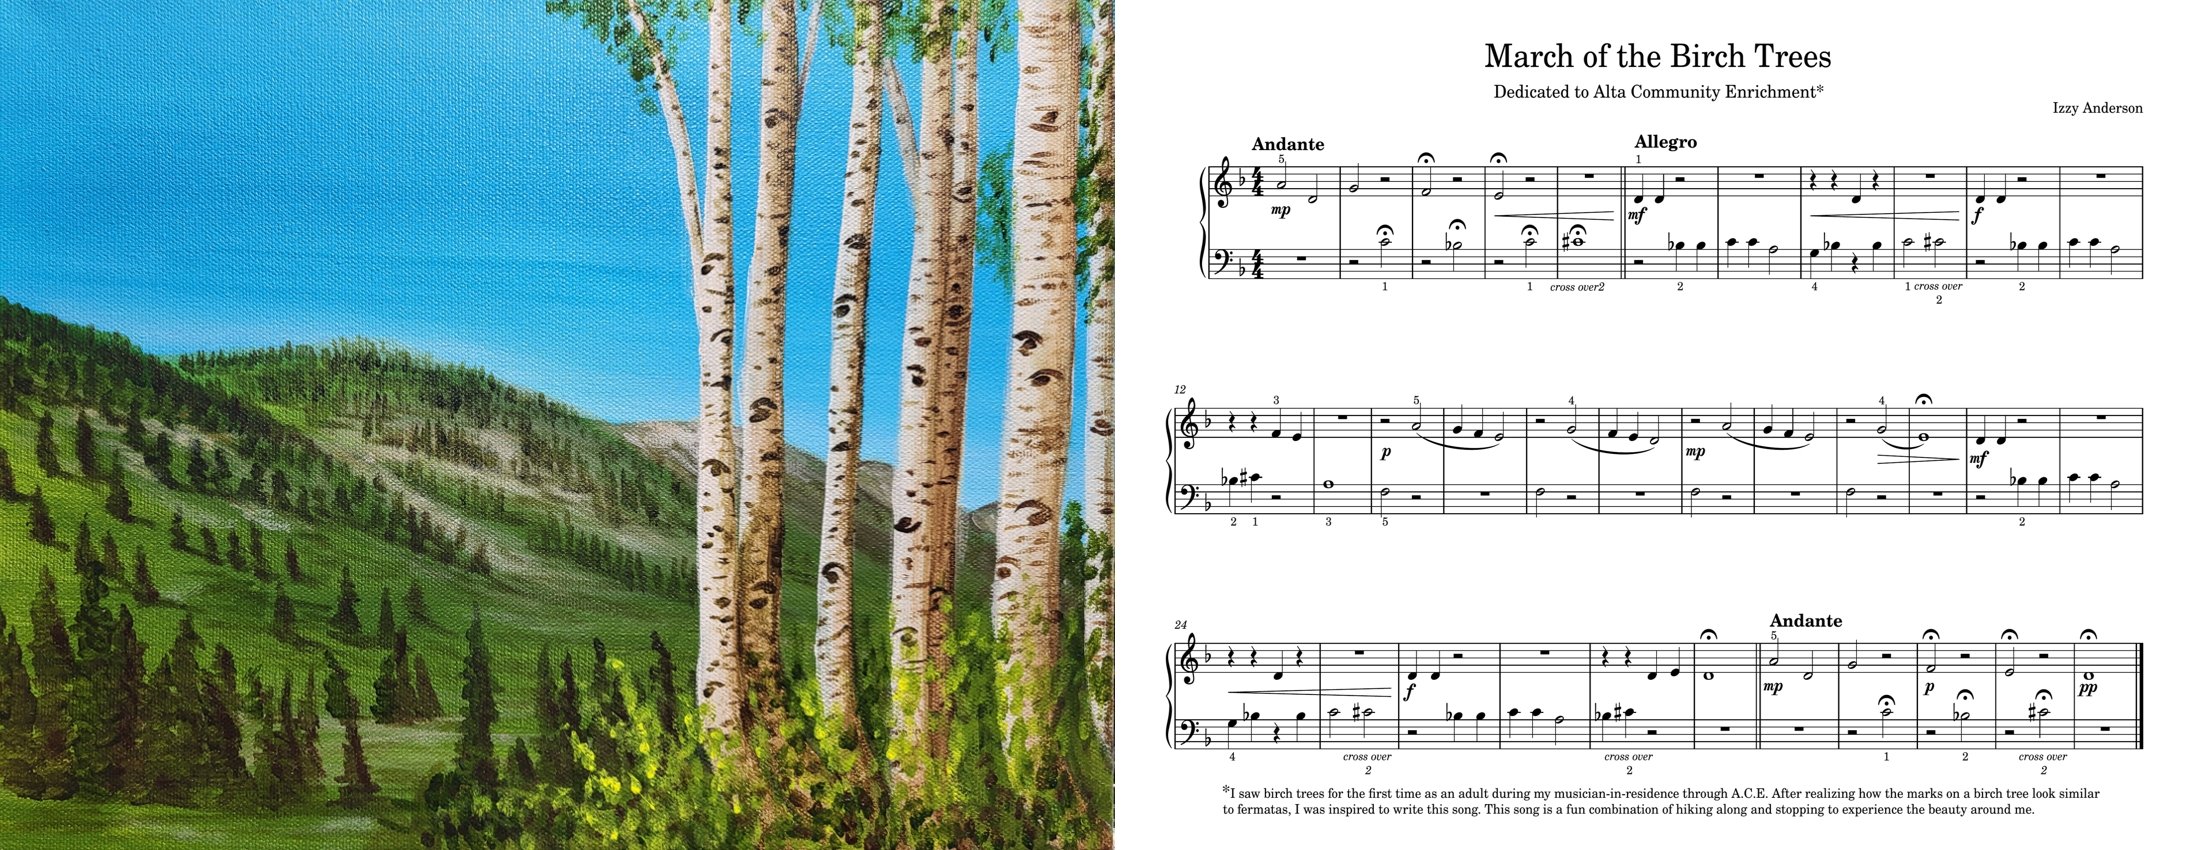 March of the Birch Tree art and song.jpg